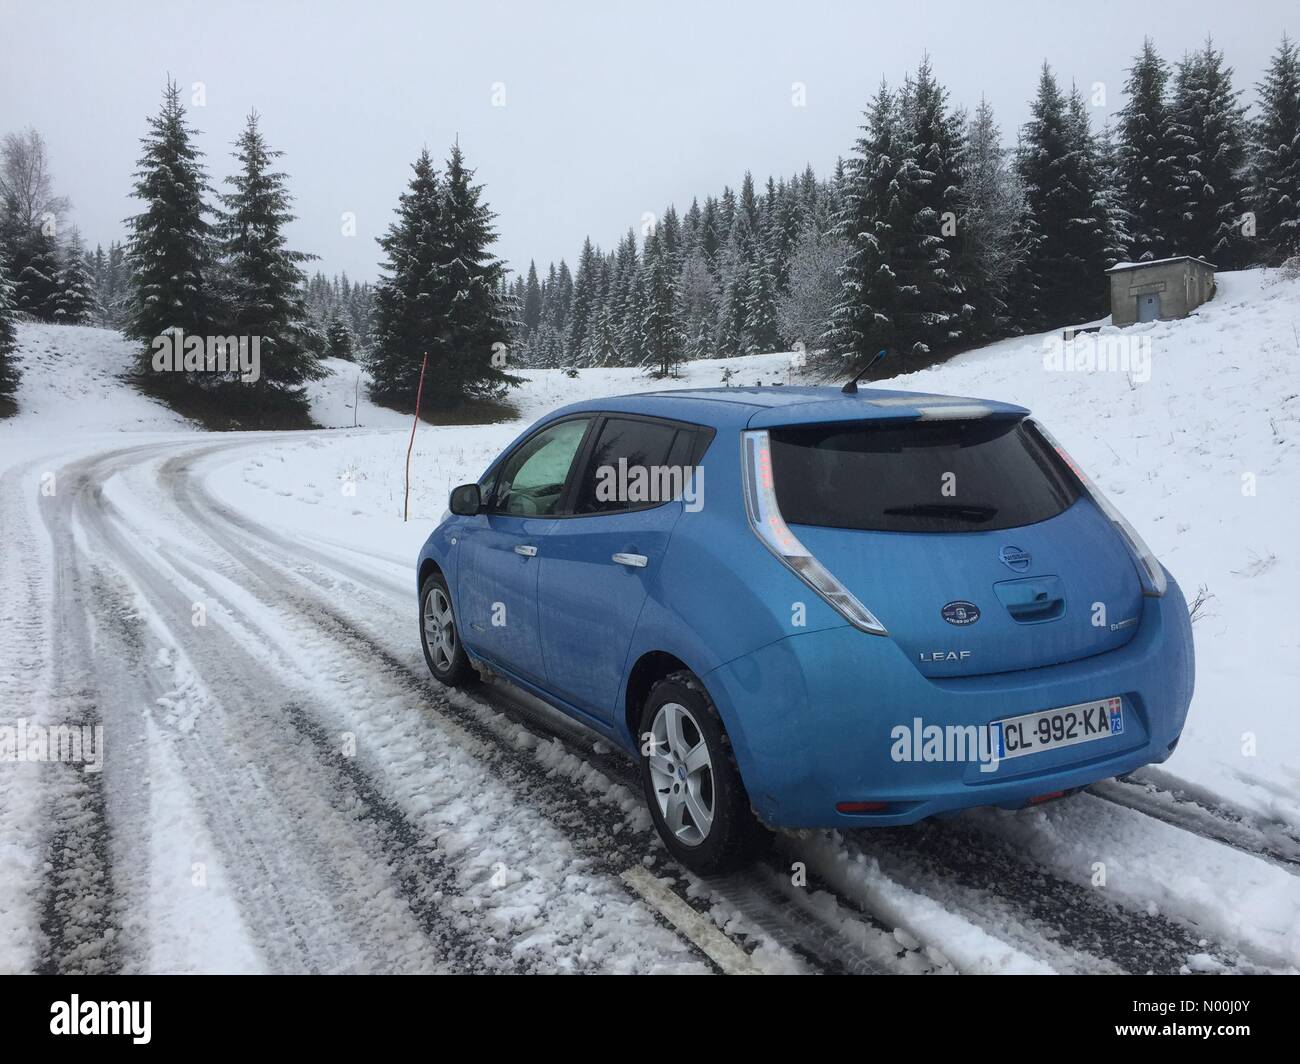 Les Saisies, Savoie, France. 25th November, 2017. Car drives though a winter landscape approaching the ski resort of Les Saisies, Savoie, France after a welcome snowfall before the opening of French ski season. Credit: Graham M. Lawrence/StockimoNews/Alamy Live News Stock Photo